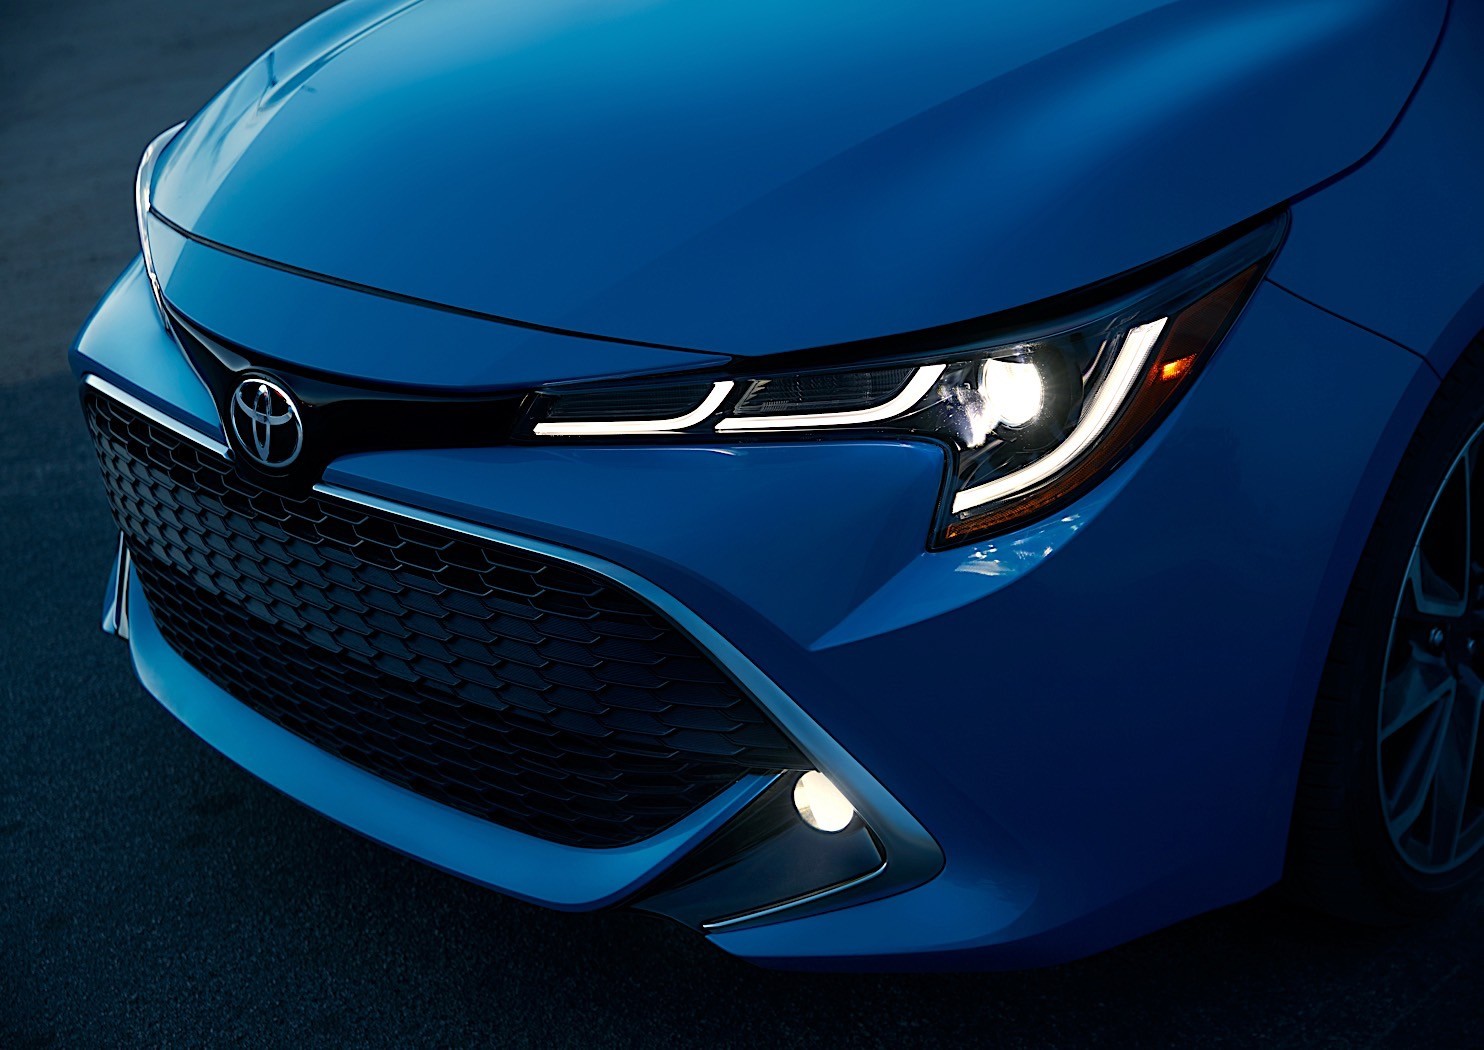 2019 Toyota Corolla Hatchback Arrives in North America at NYIAS ...